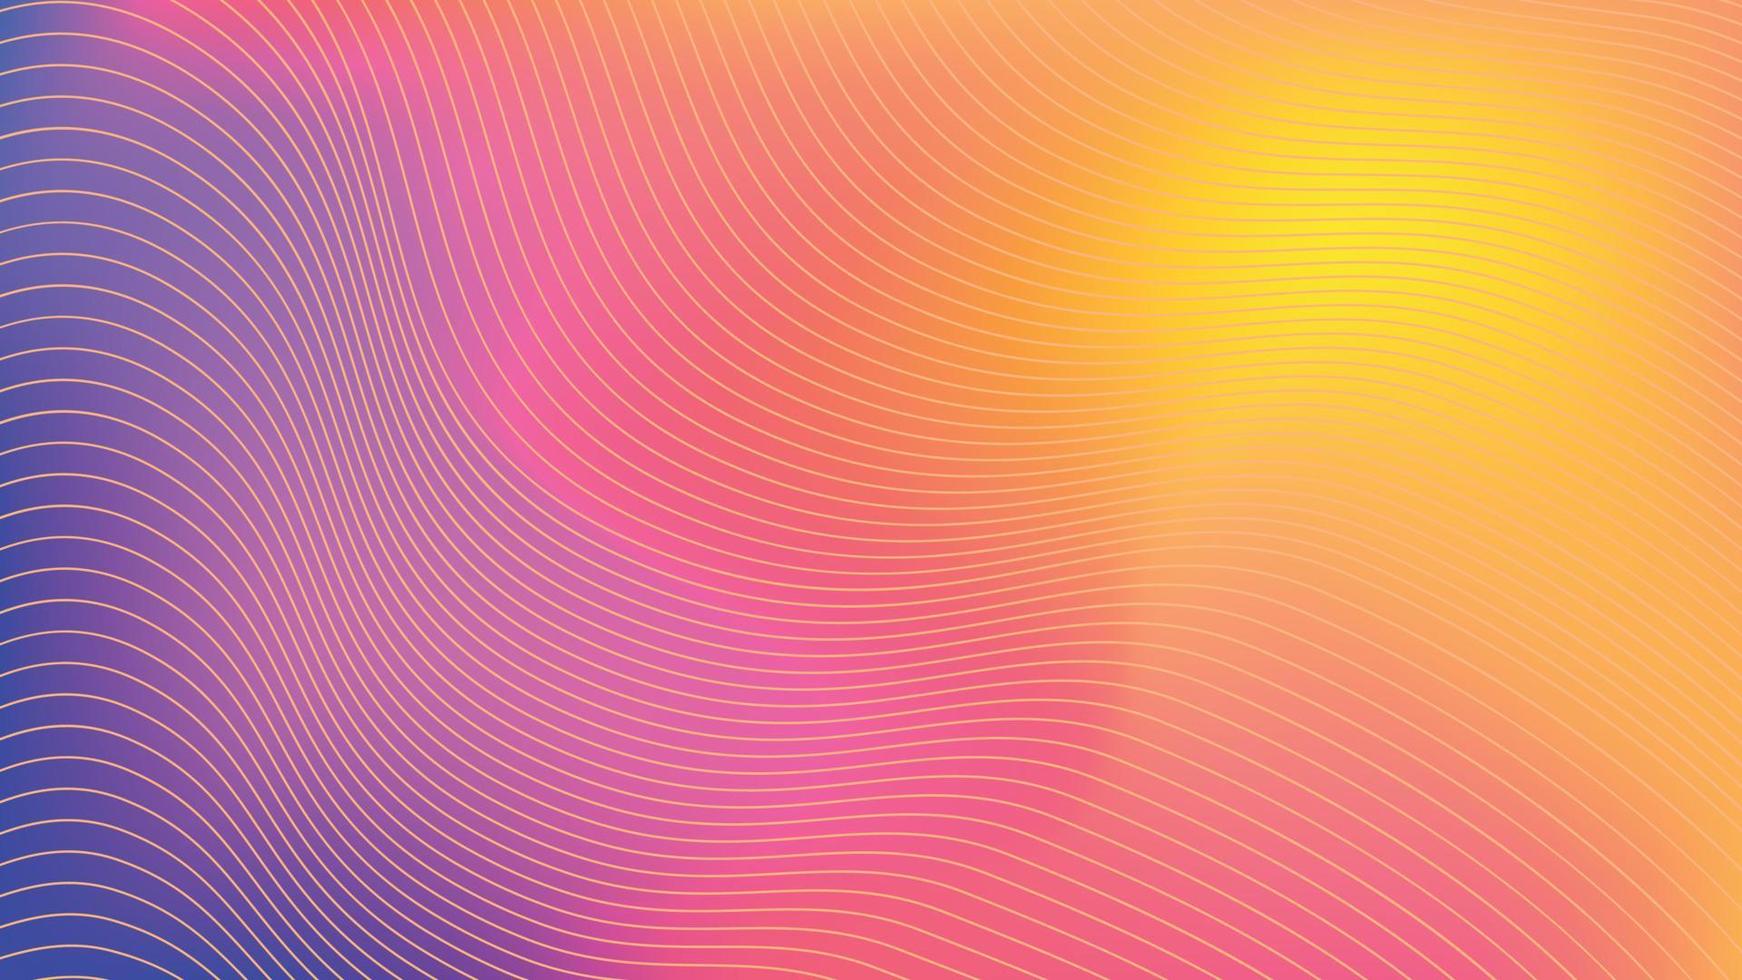 Gradient stripe abstract background. Smooth soft and warm bright tender violet, yellow, pink gradient for app, web design, web pages, banners, greeting cards. Vector illustration design.